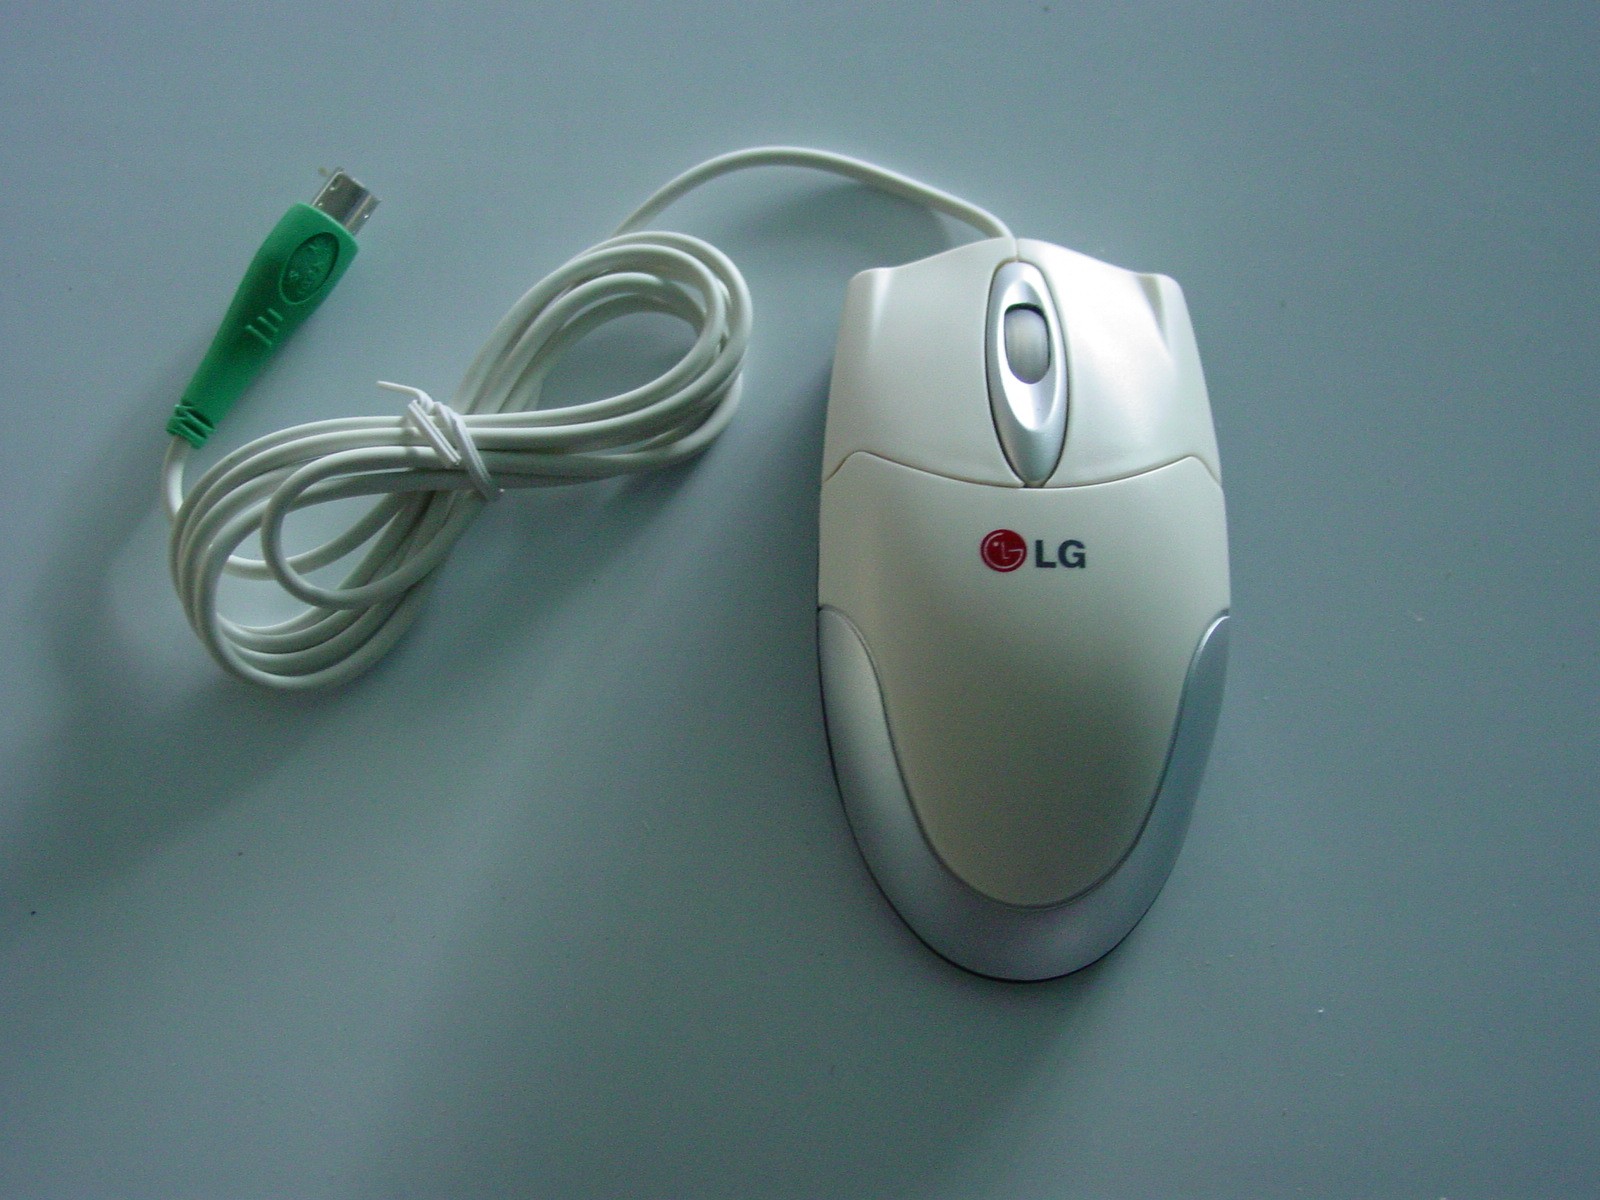 =PS/2 optical mouse, beige and silver